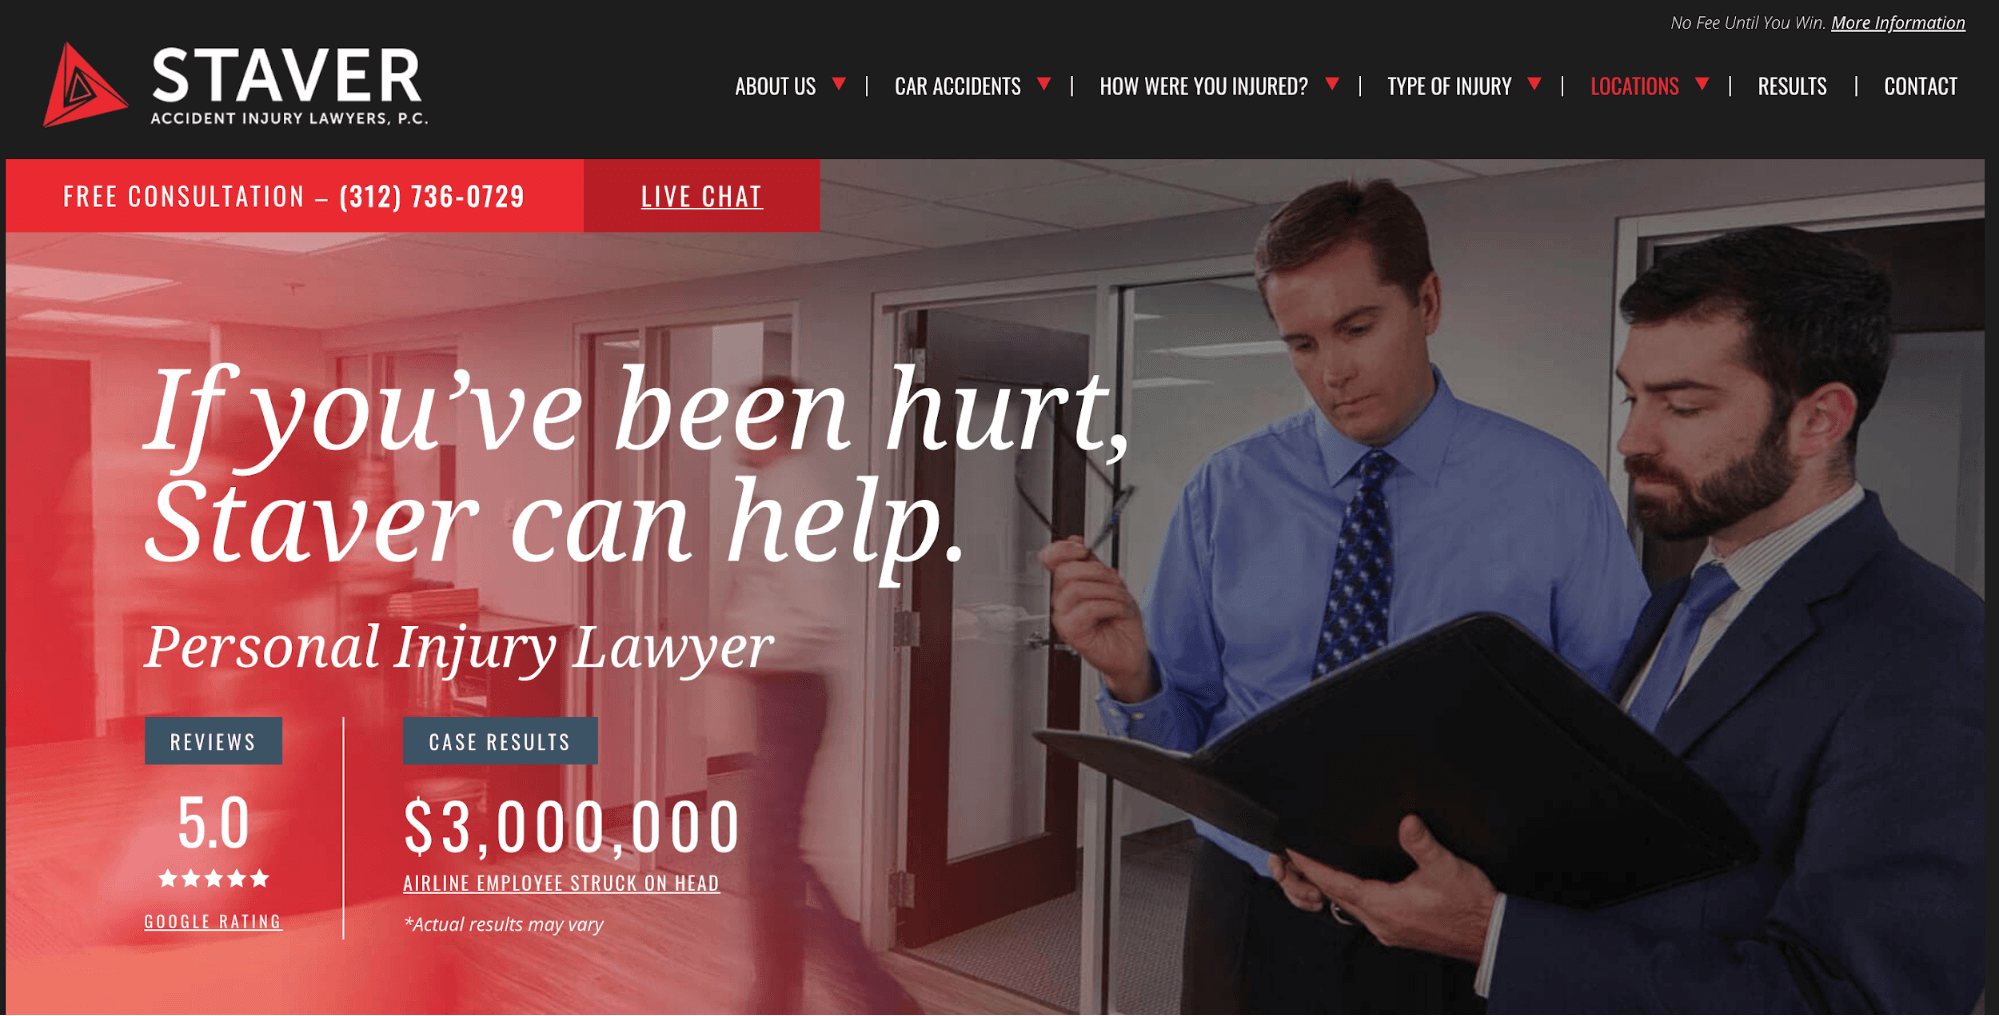 Law firm website design inspiration: use ratings on your front page